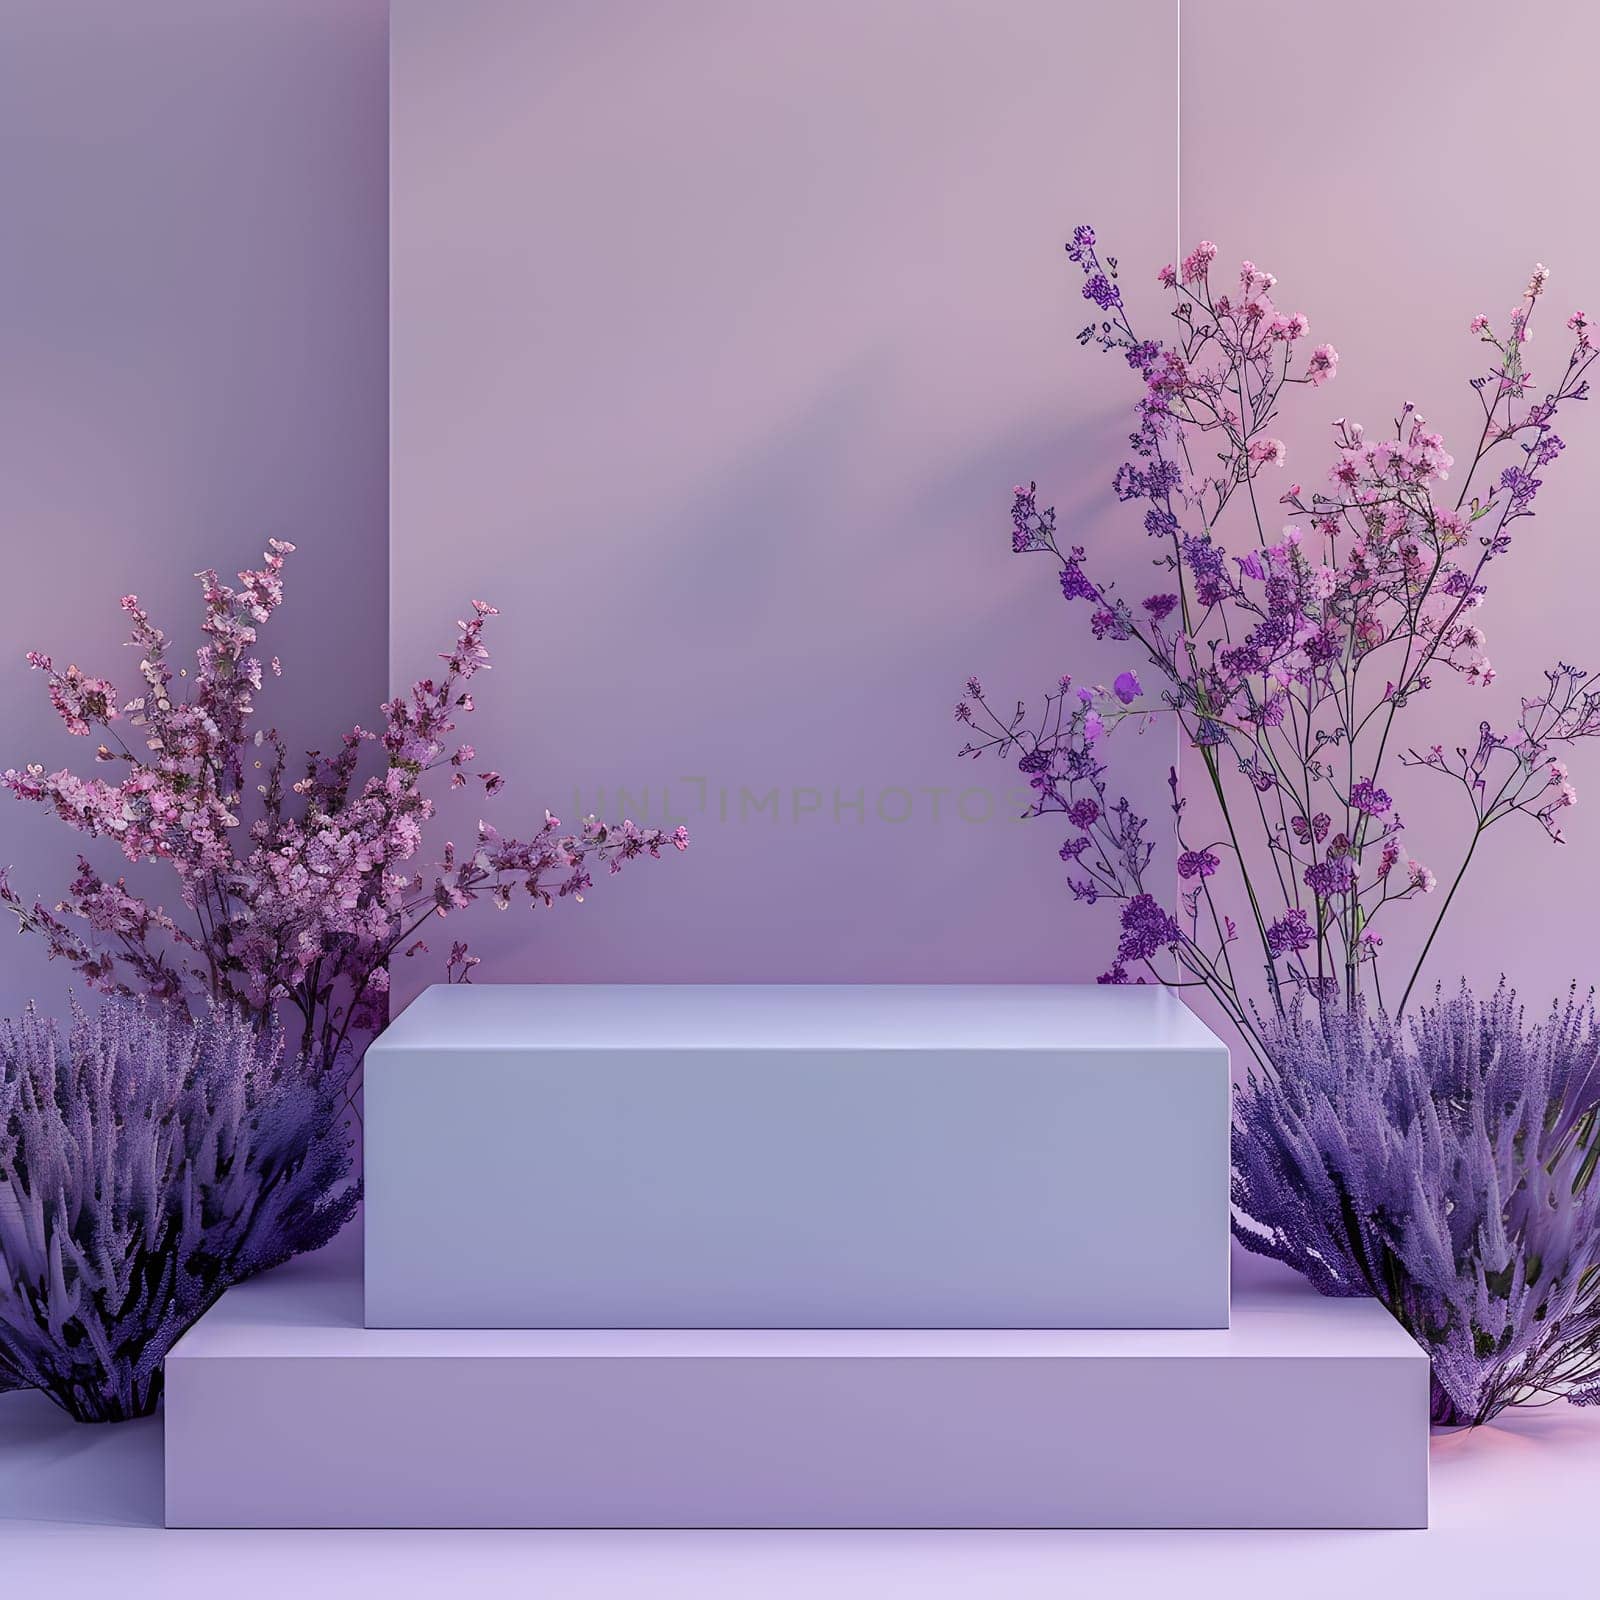 Violet and magenta flowers on a wood podium against a purple wall by Nadtochiy